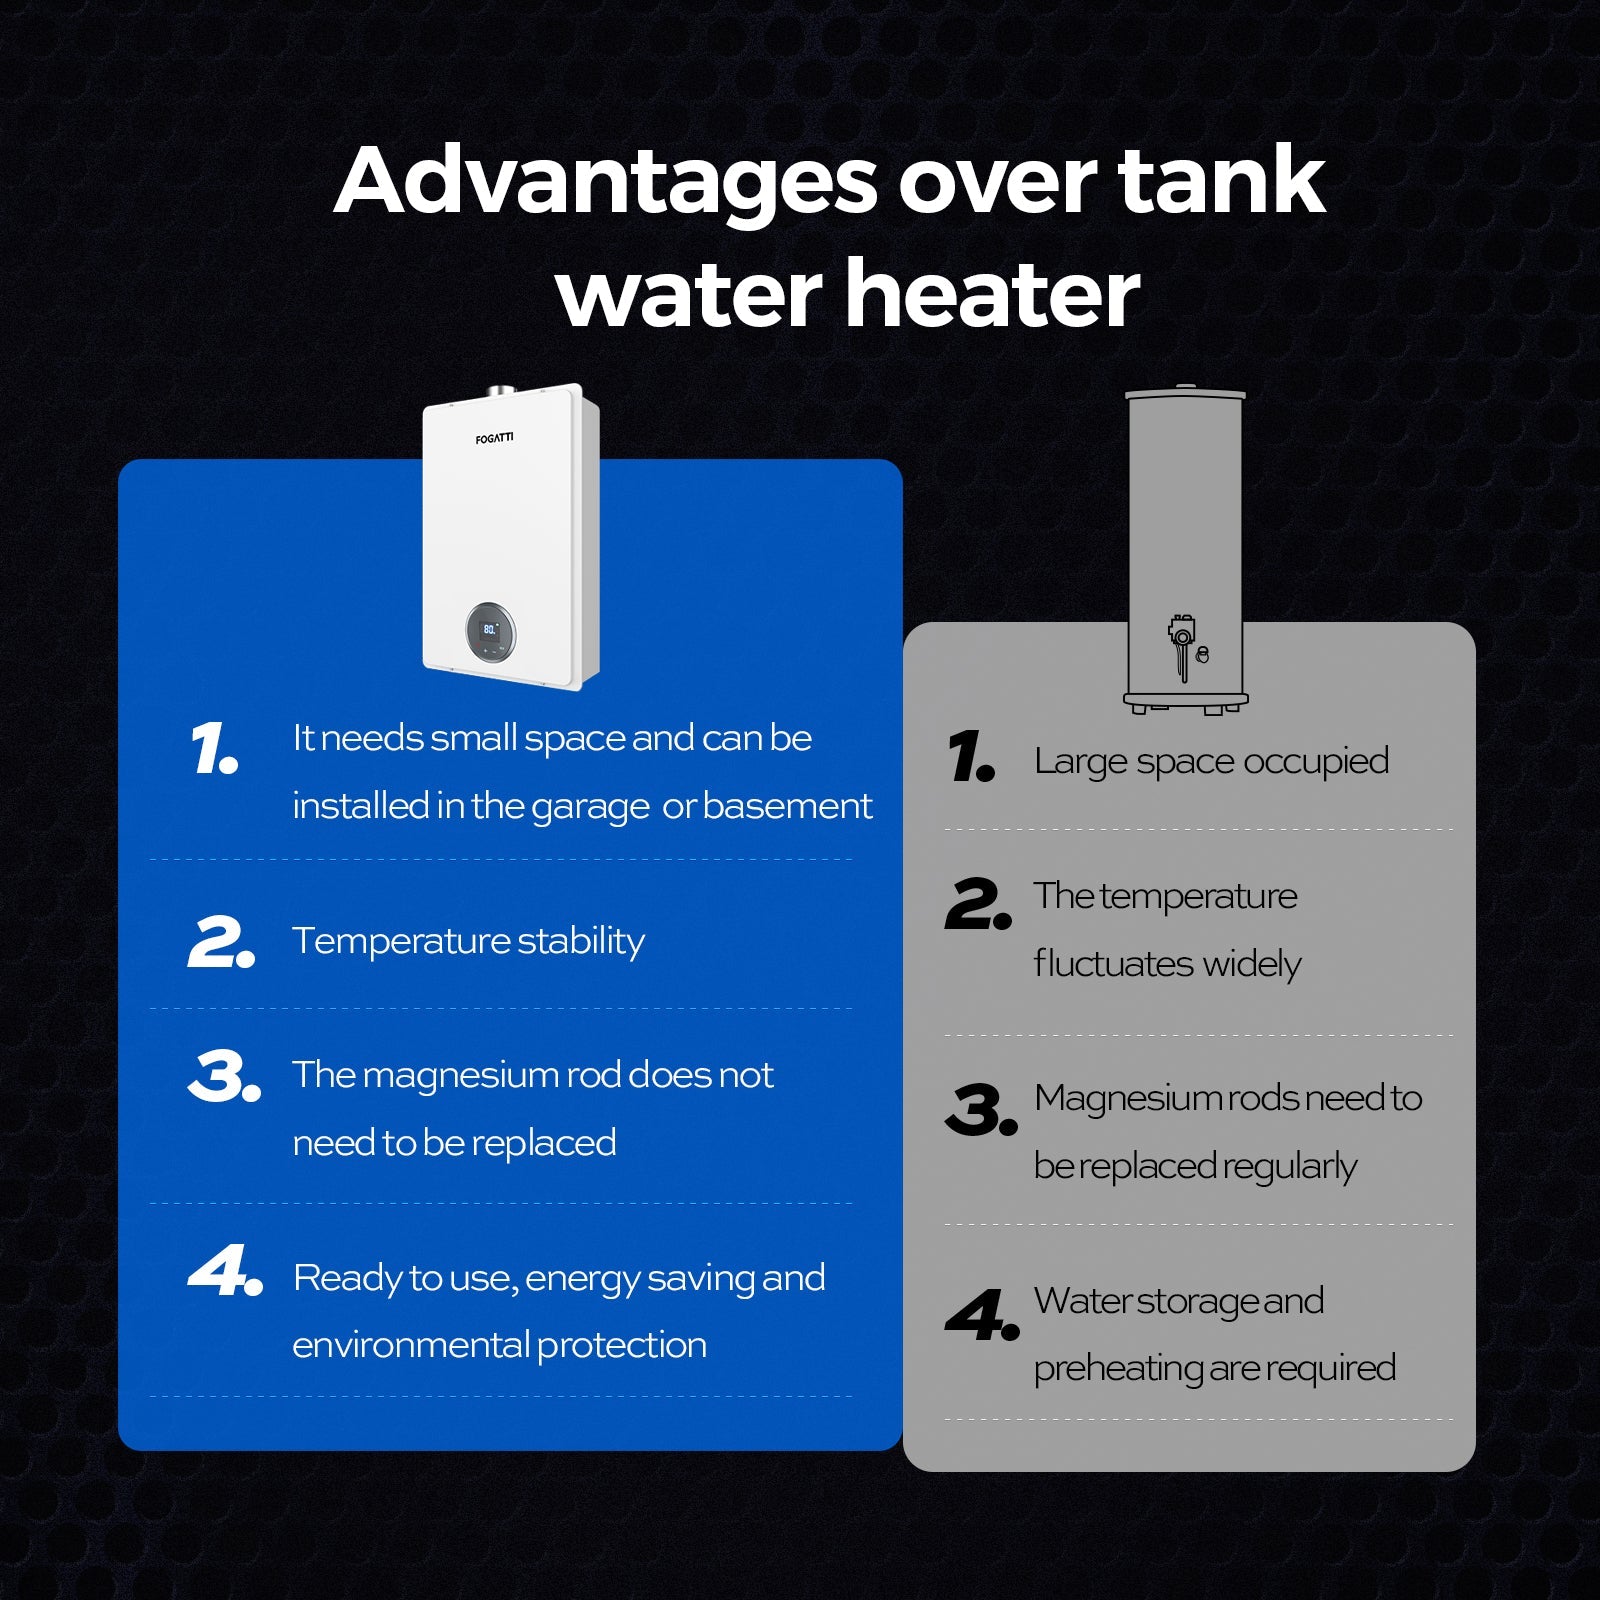 Propane or Natural Gas Tankless Water Heater 6.3-7.5 GPM, 145,000-170,000 BTU Indoor Instant Hot Water Heater - FOGATTI SHOP